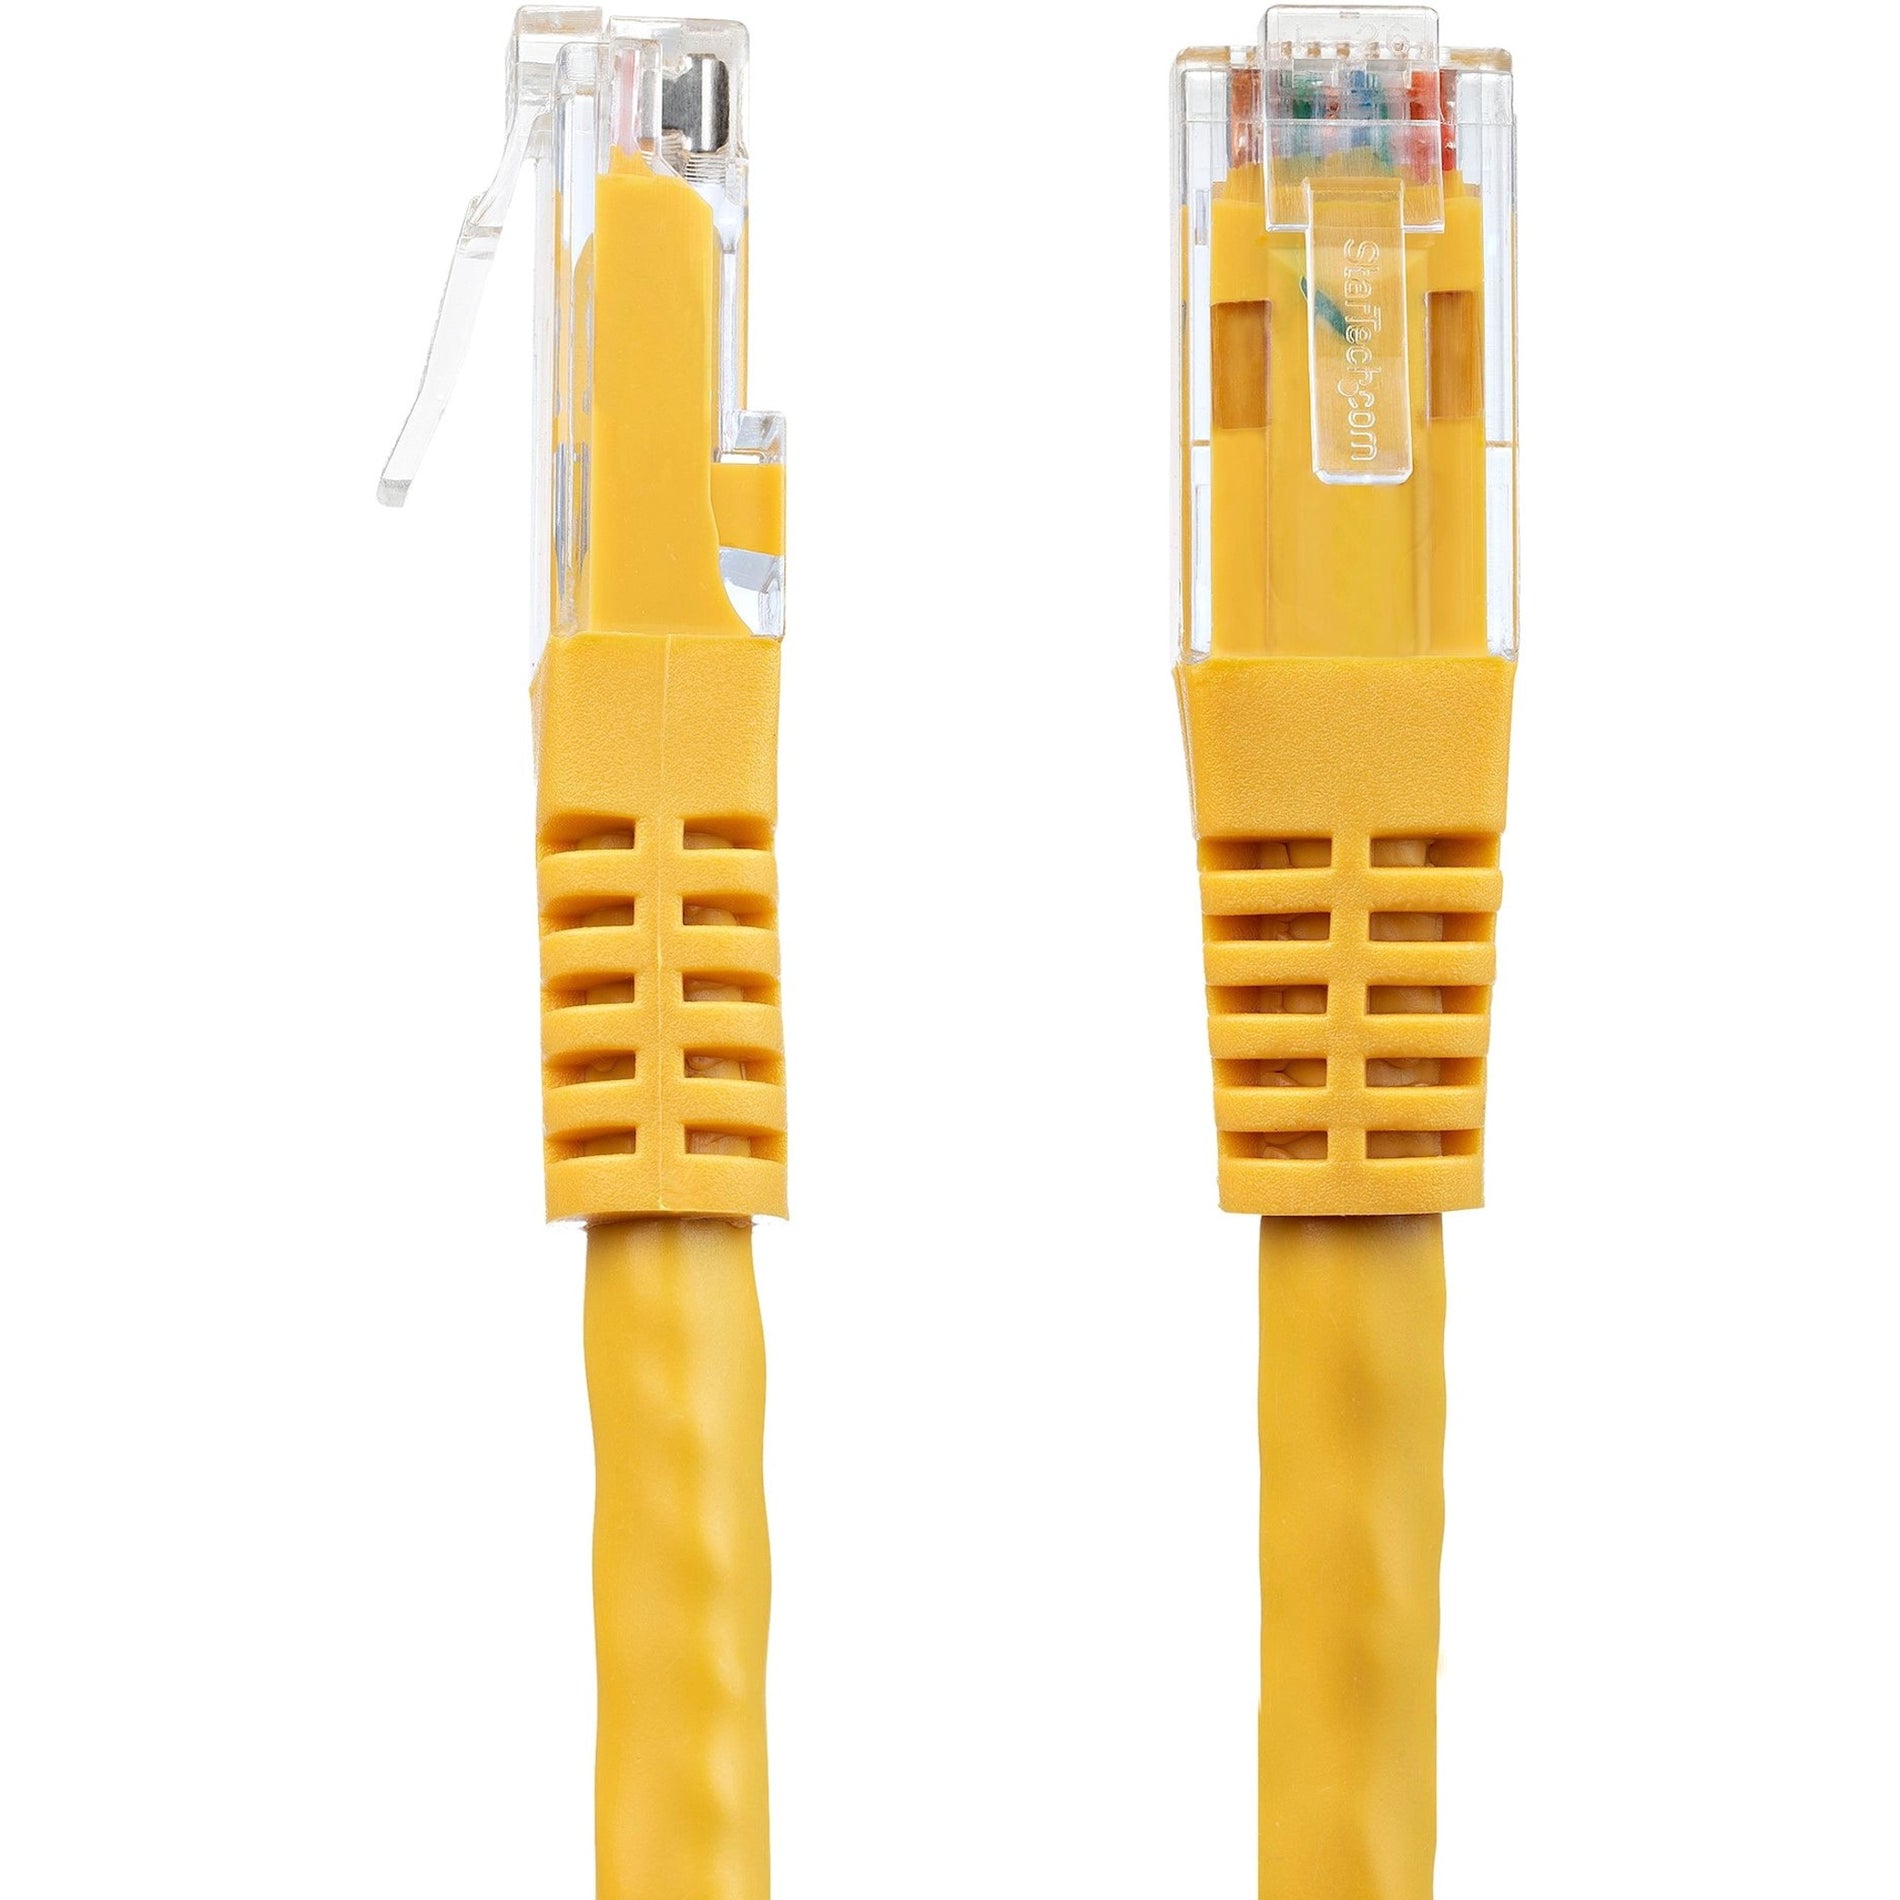 StarTech.com C6PATCH1YL 1ft Yellow Cat6 UTP Patch Cable ETL Verified, 10 Gbit/s Data Transfer Rate, PoE, Bend Resistant, Rust Resistant, Fray Resistant, Stranded, PoE++, Corrosion Resistant, Damage Resistant, Molded, Strain Relief